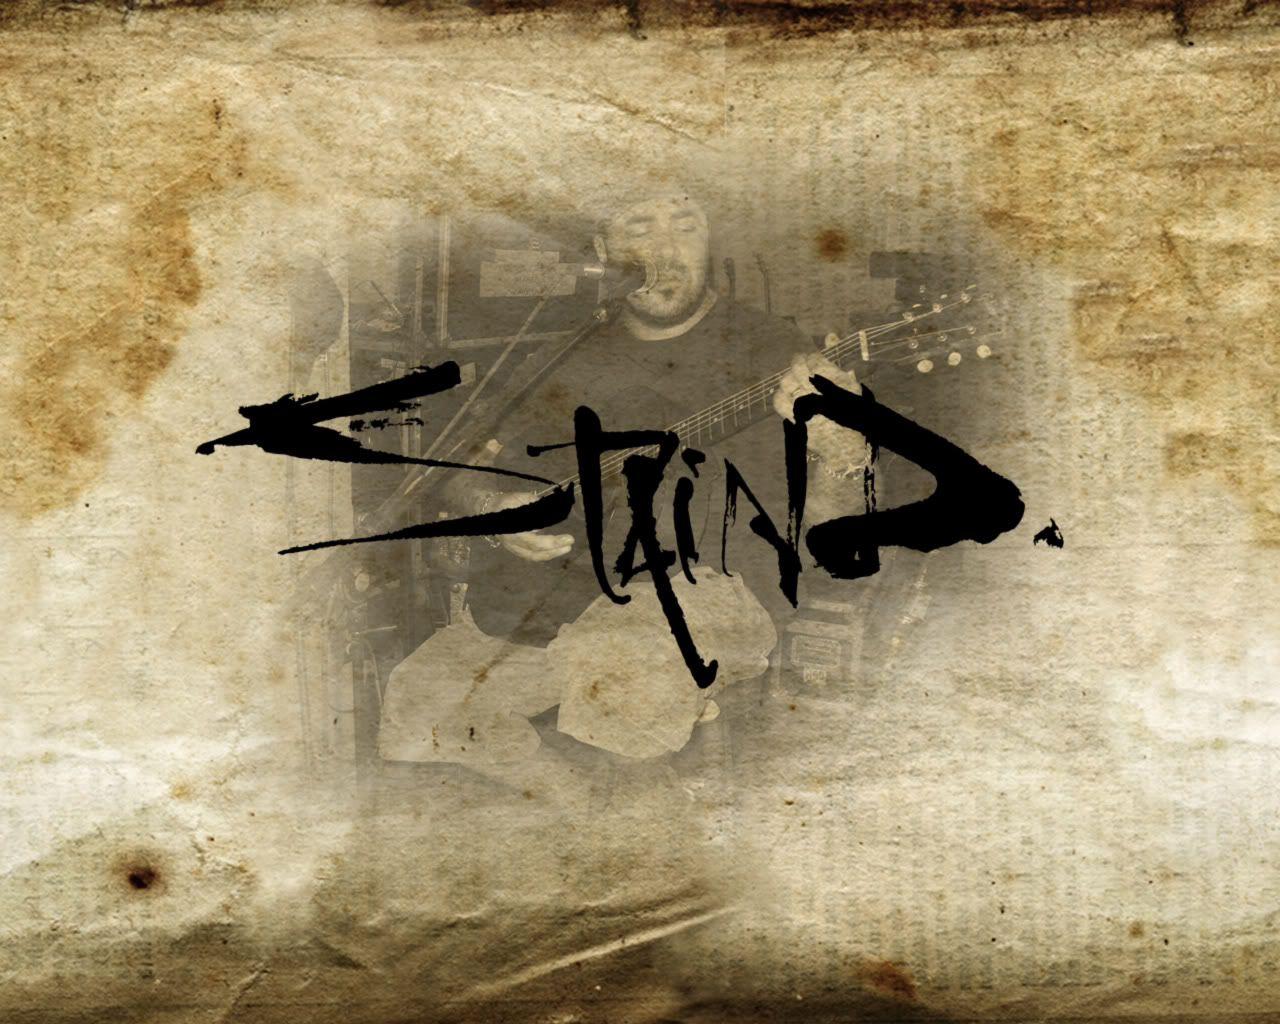 Staind Logo - Staind logo with Aaron Lewis in the background. Staind